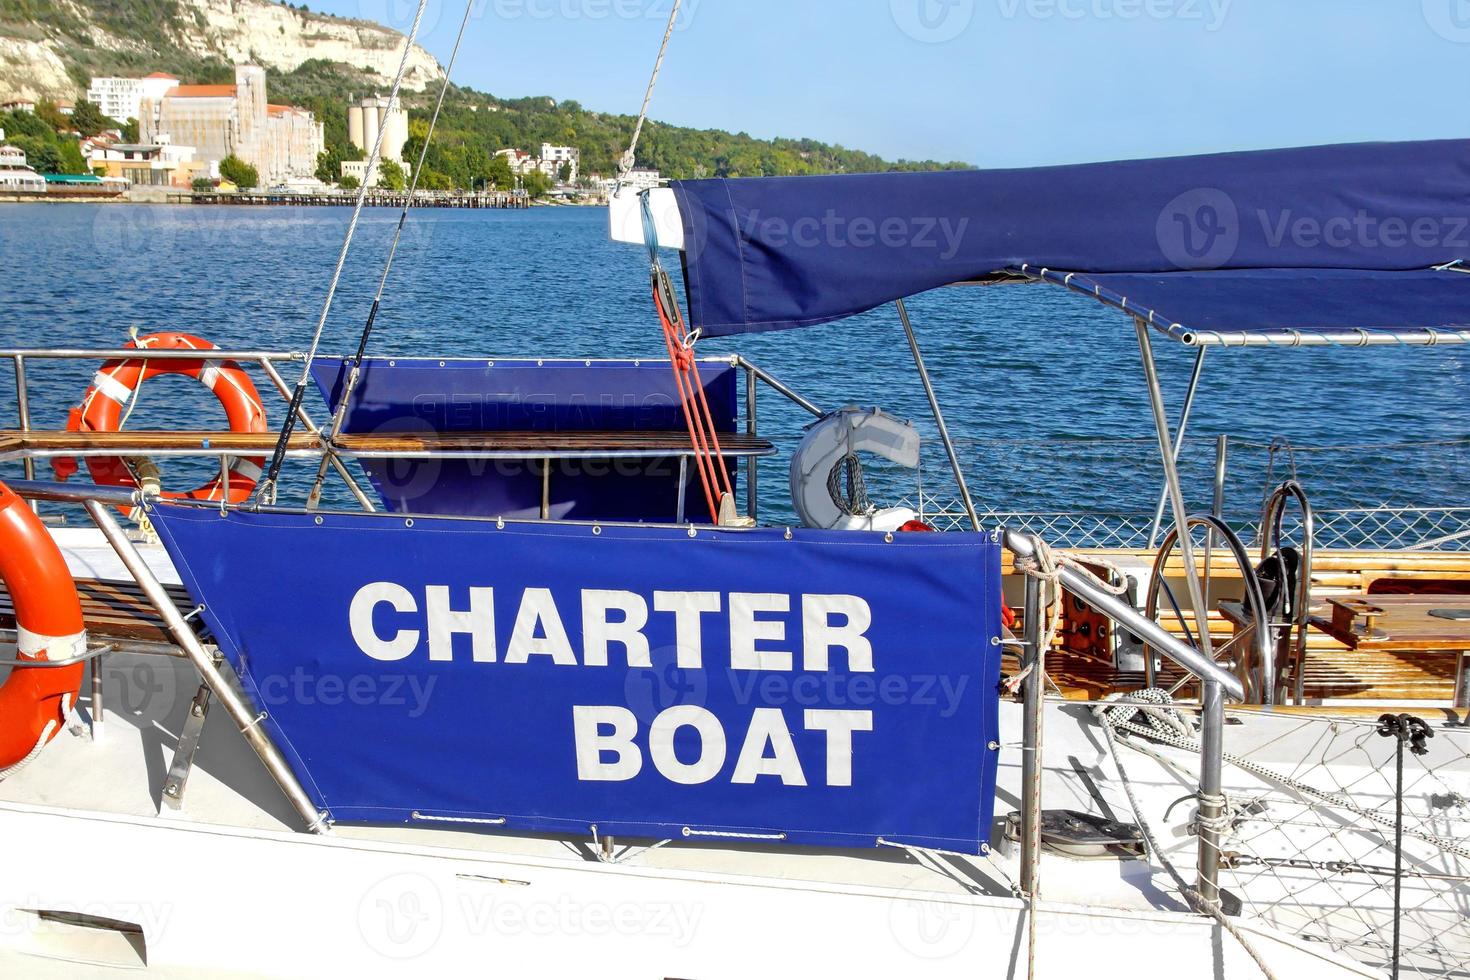 Rental Charter Boat At The Sea Pier photo